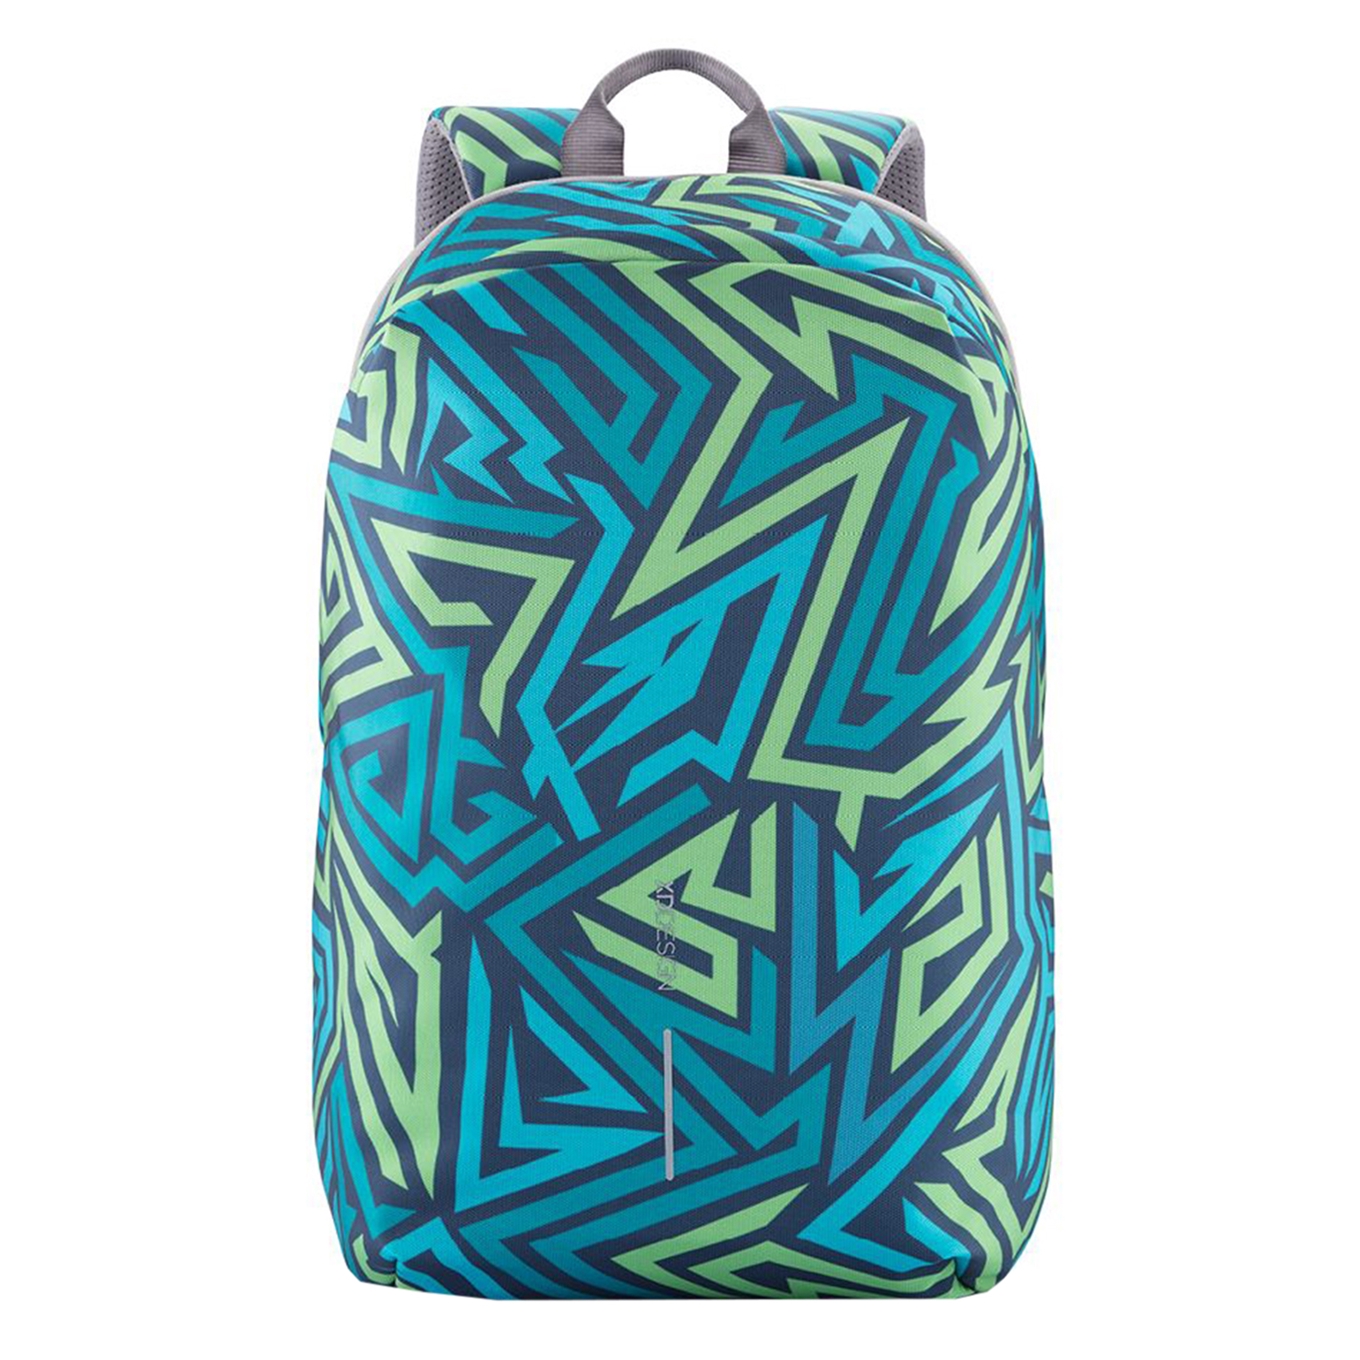 XD Design Bobby Soft Anti-Diefstal Rugzak abstract backpack